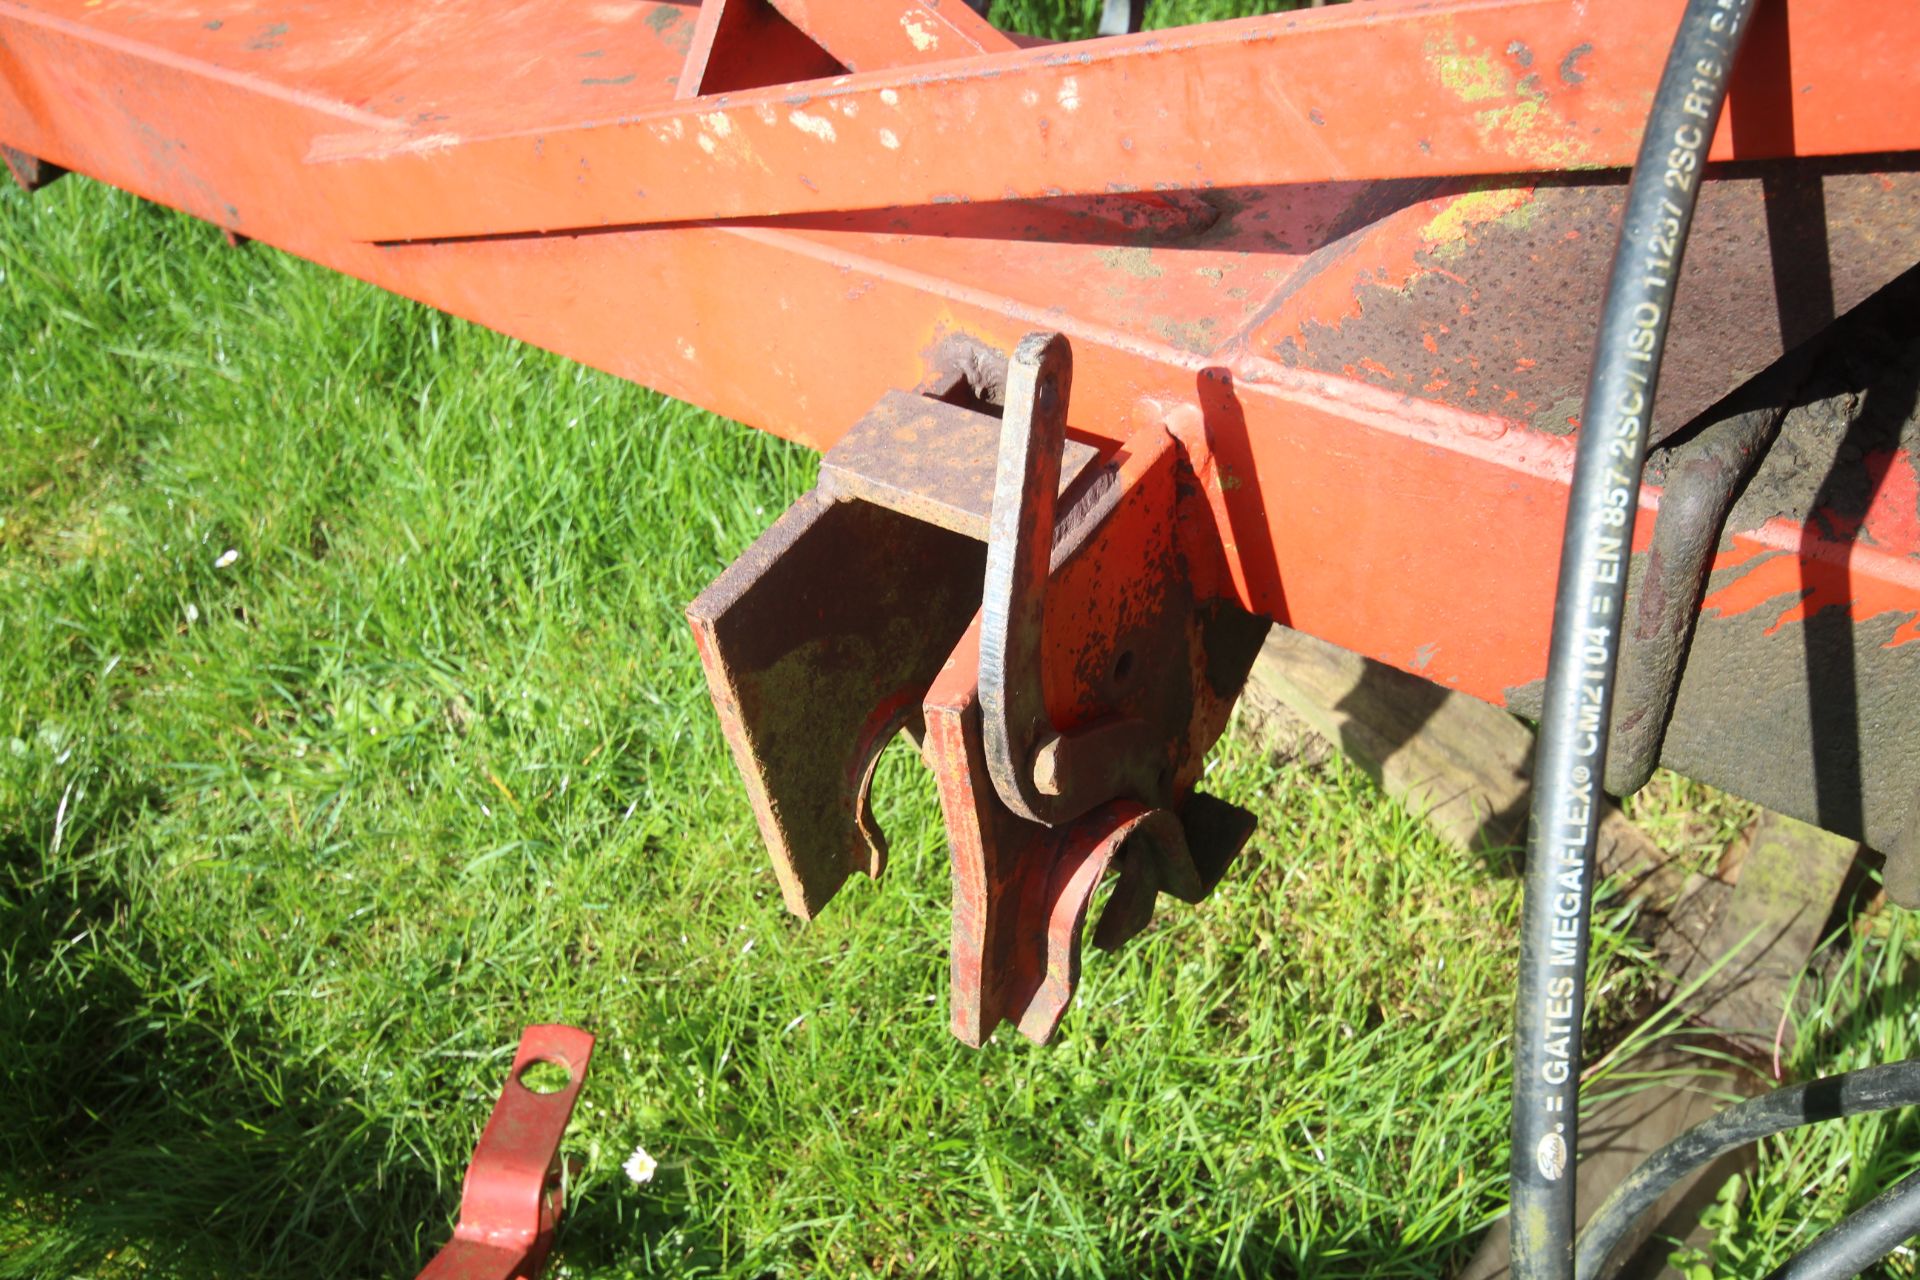 Large set of hydraulic folding spring tines. Owned from new. From a local Deceased estate. - Image 8 of 17